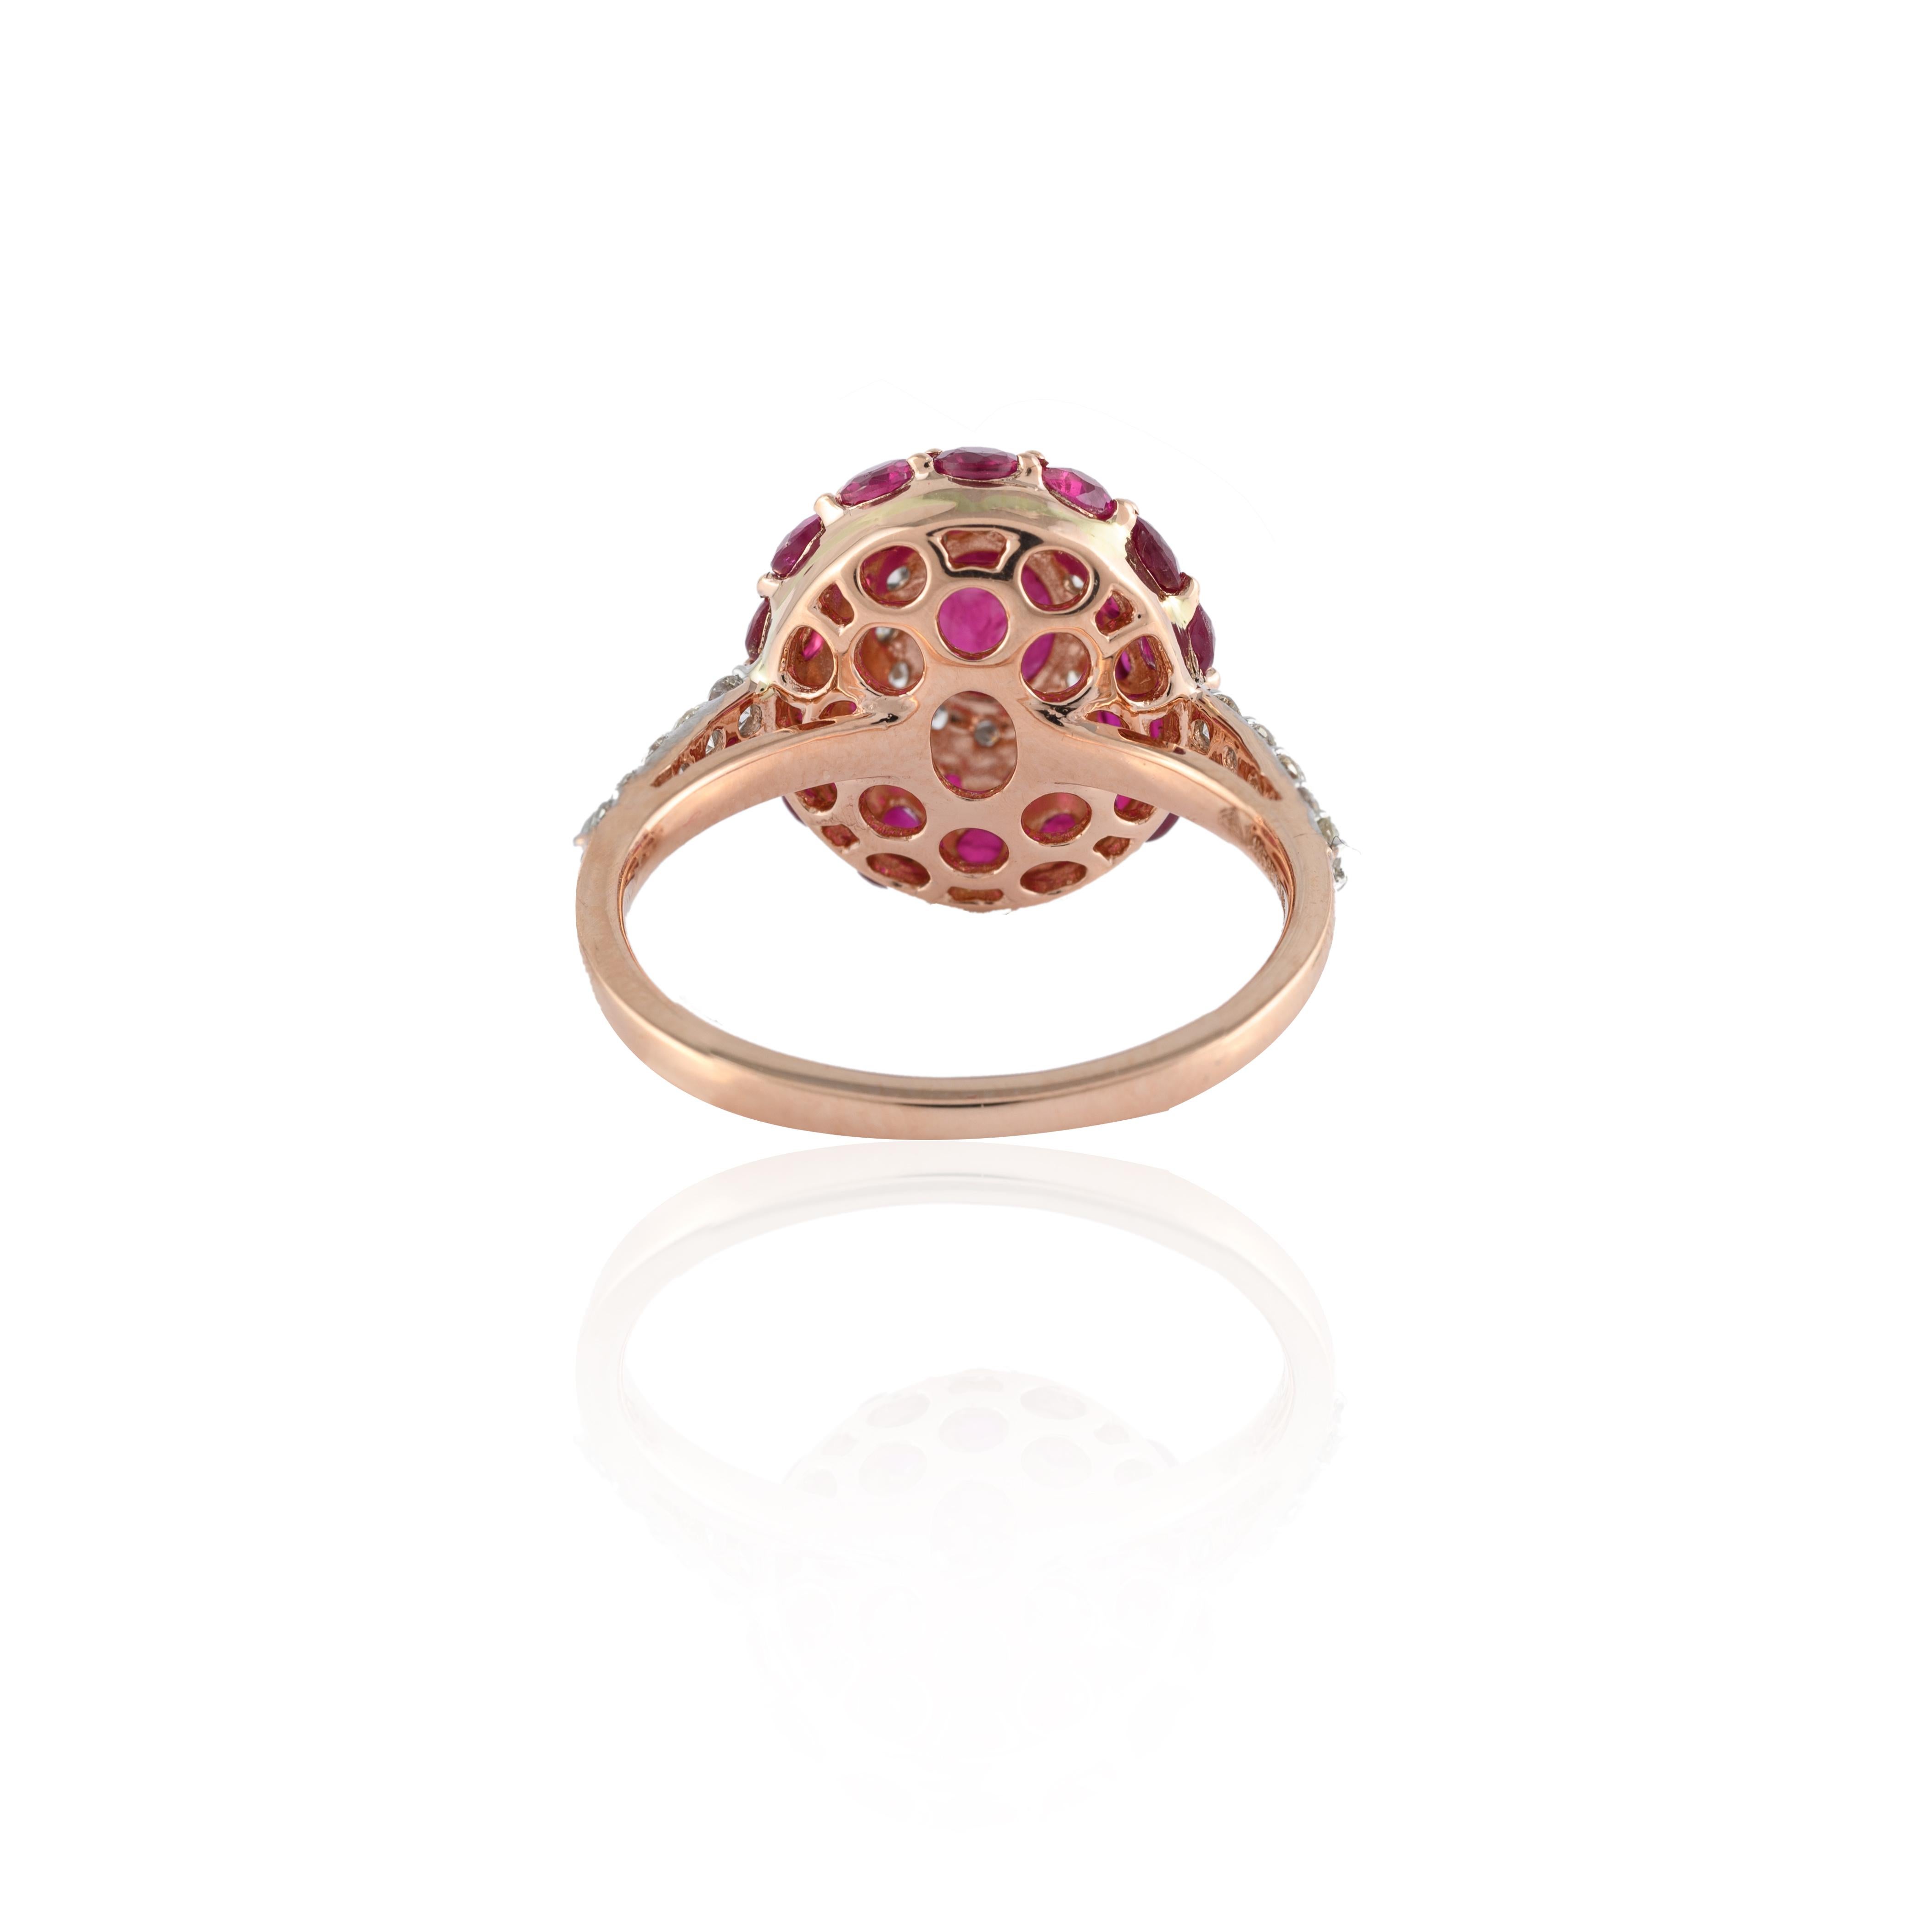 For Sale:  2.76 Carat Natural Ruby Cluster Ring in 14k Solid Rose Gold with Diamonds 4